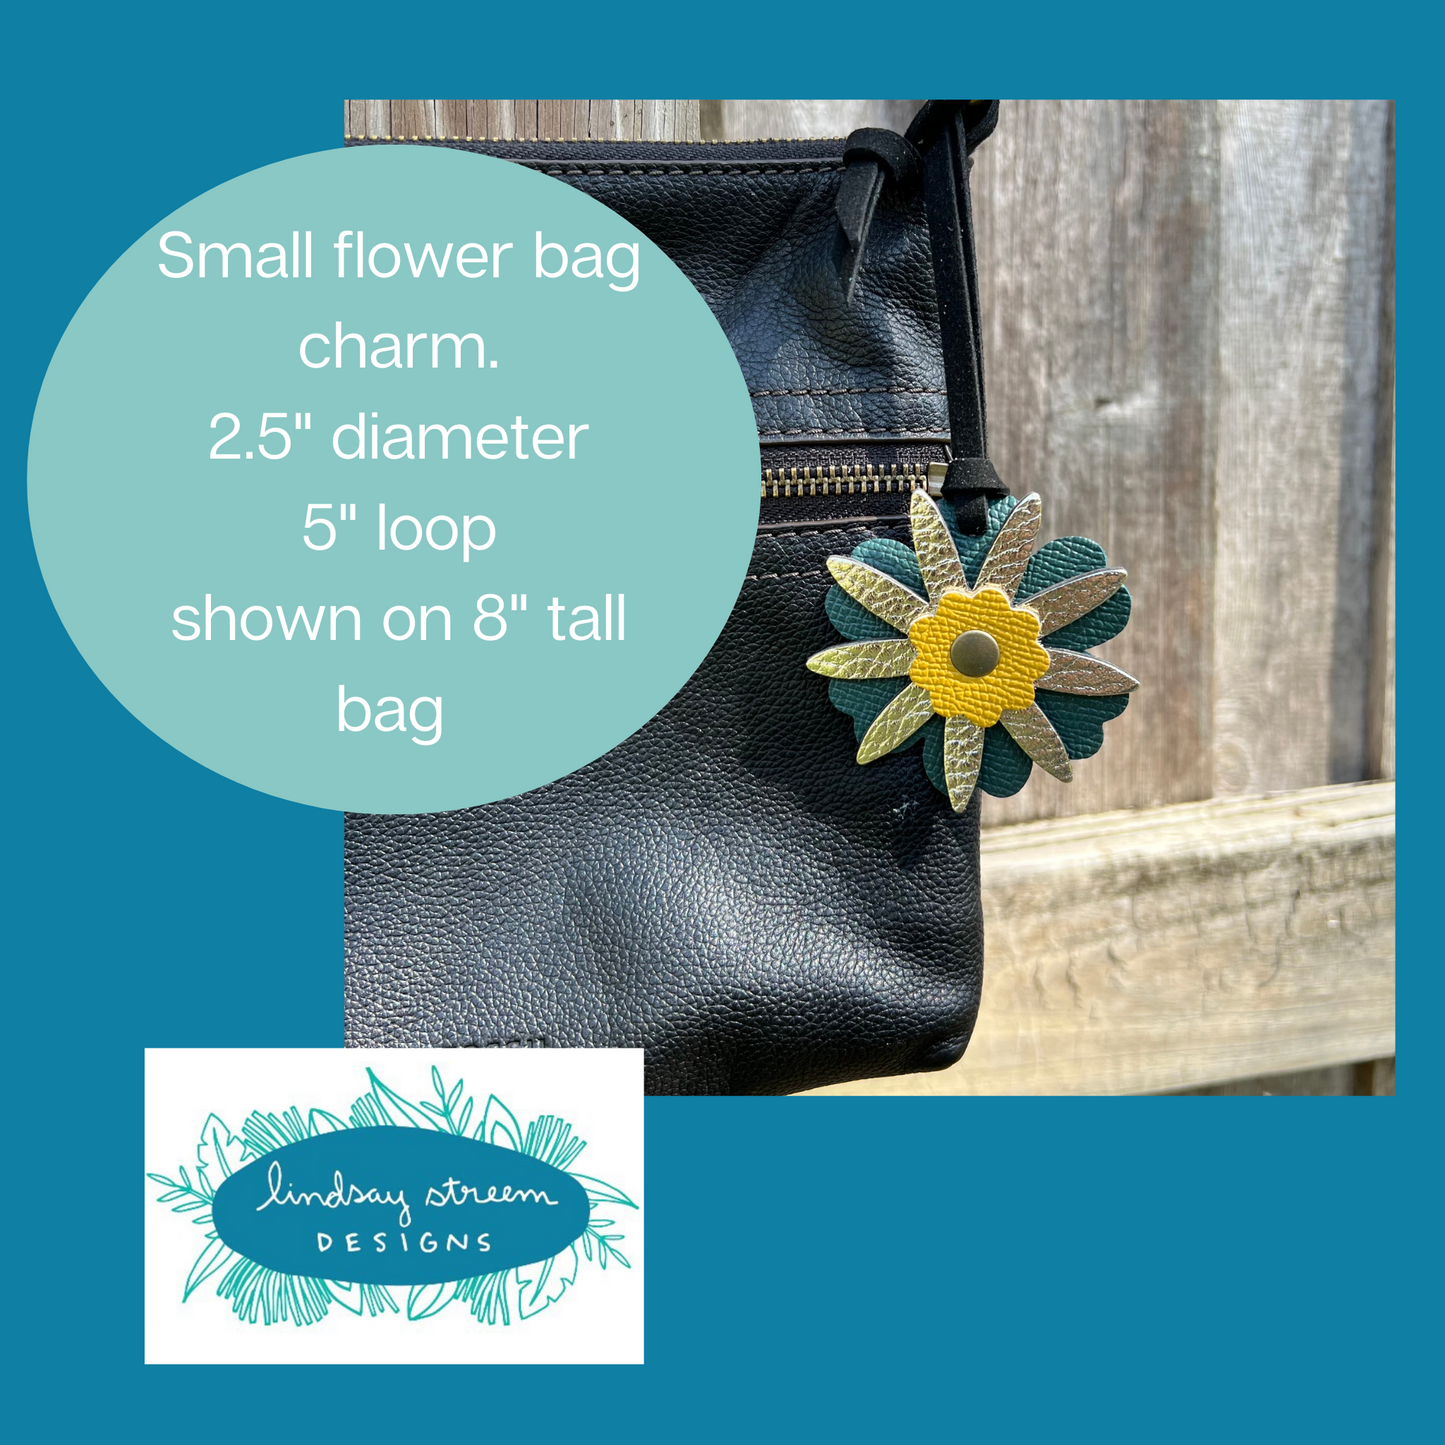 Small Leather Flower Purse Charm - Orange, Yellow and Brown